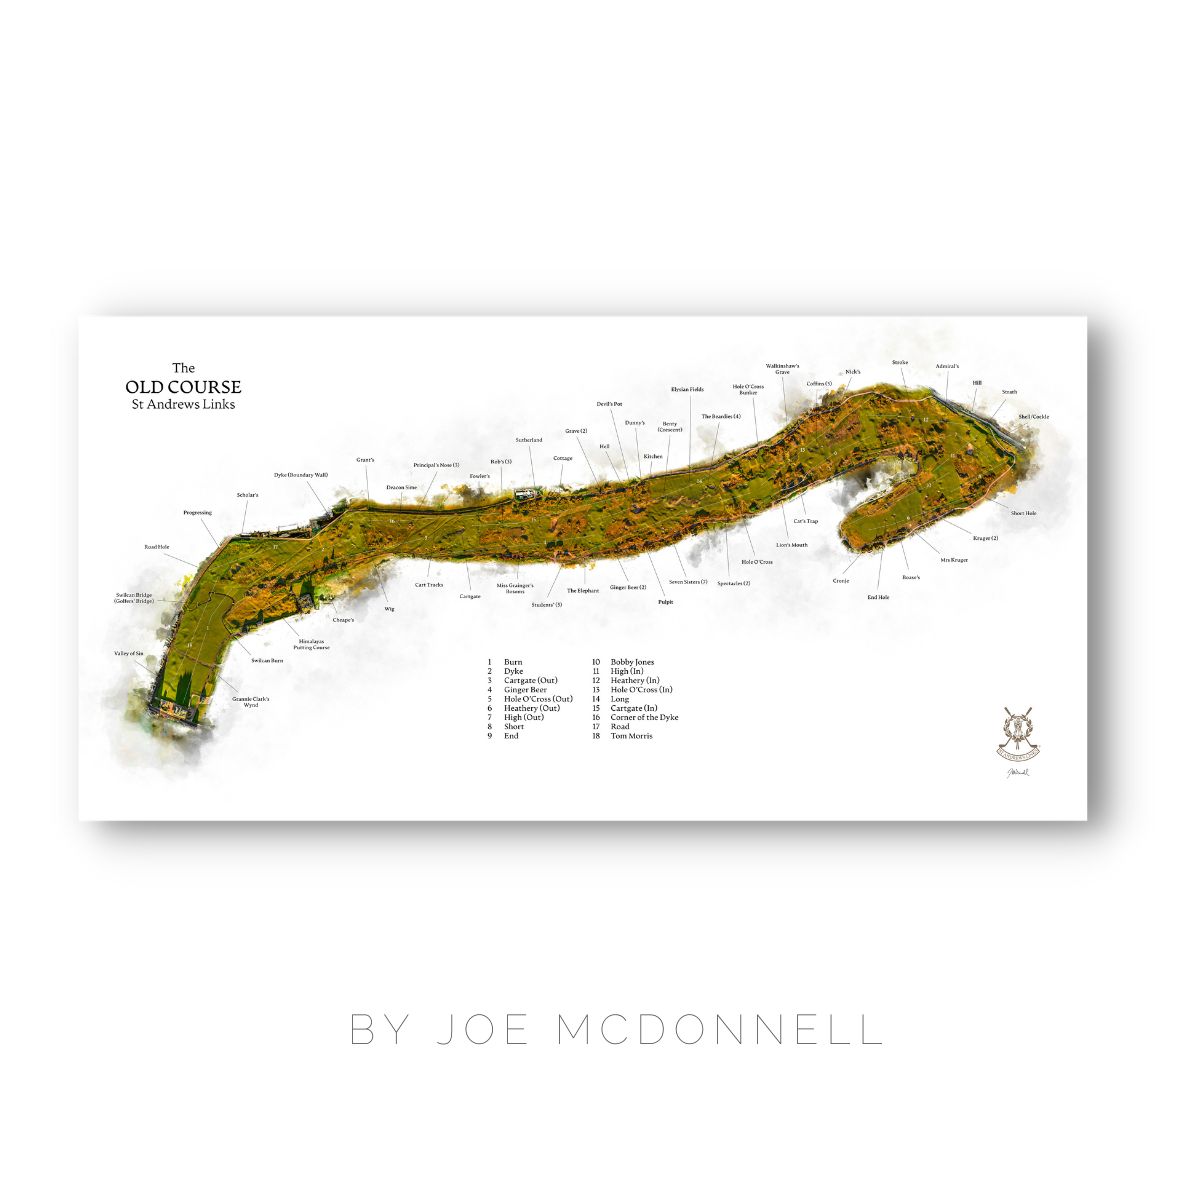 NAMED FEATURES OF THE OLD COURSE PRINT BY JOE MCDONNELL